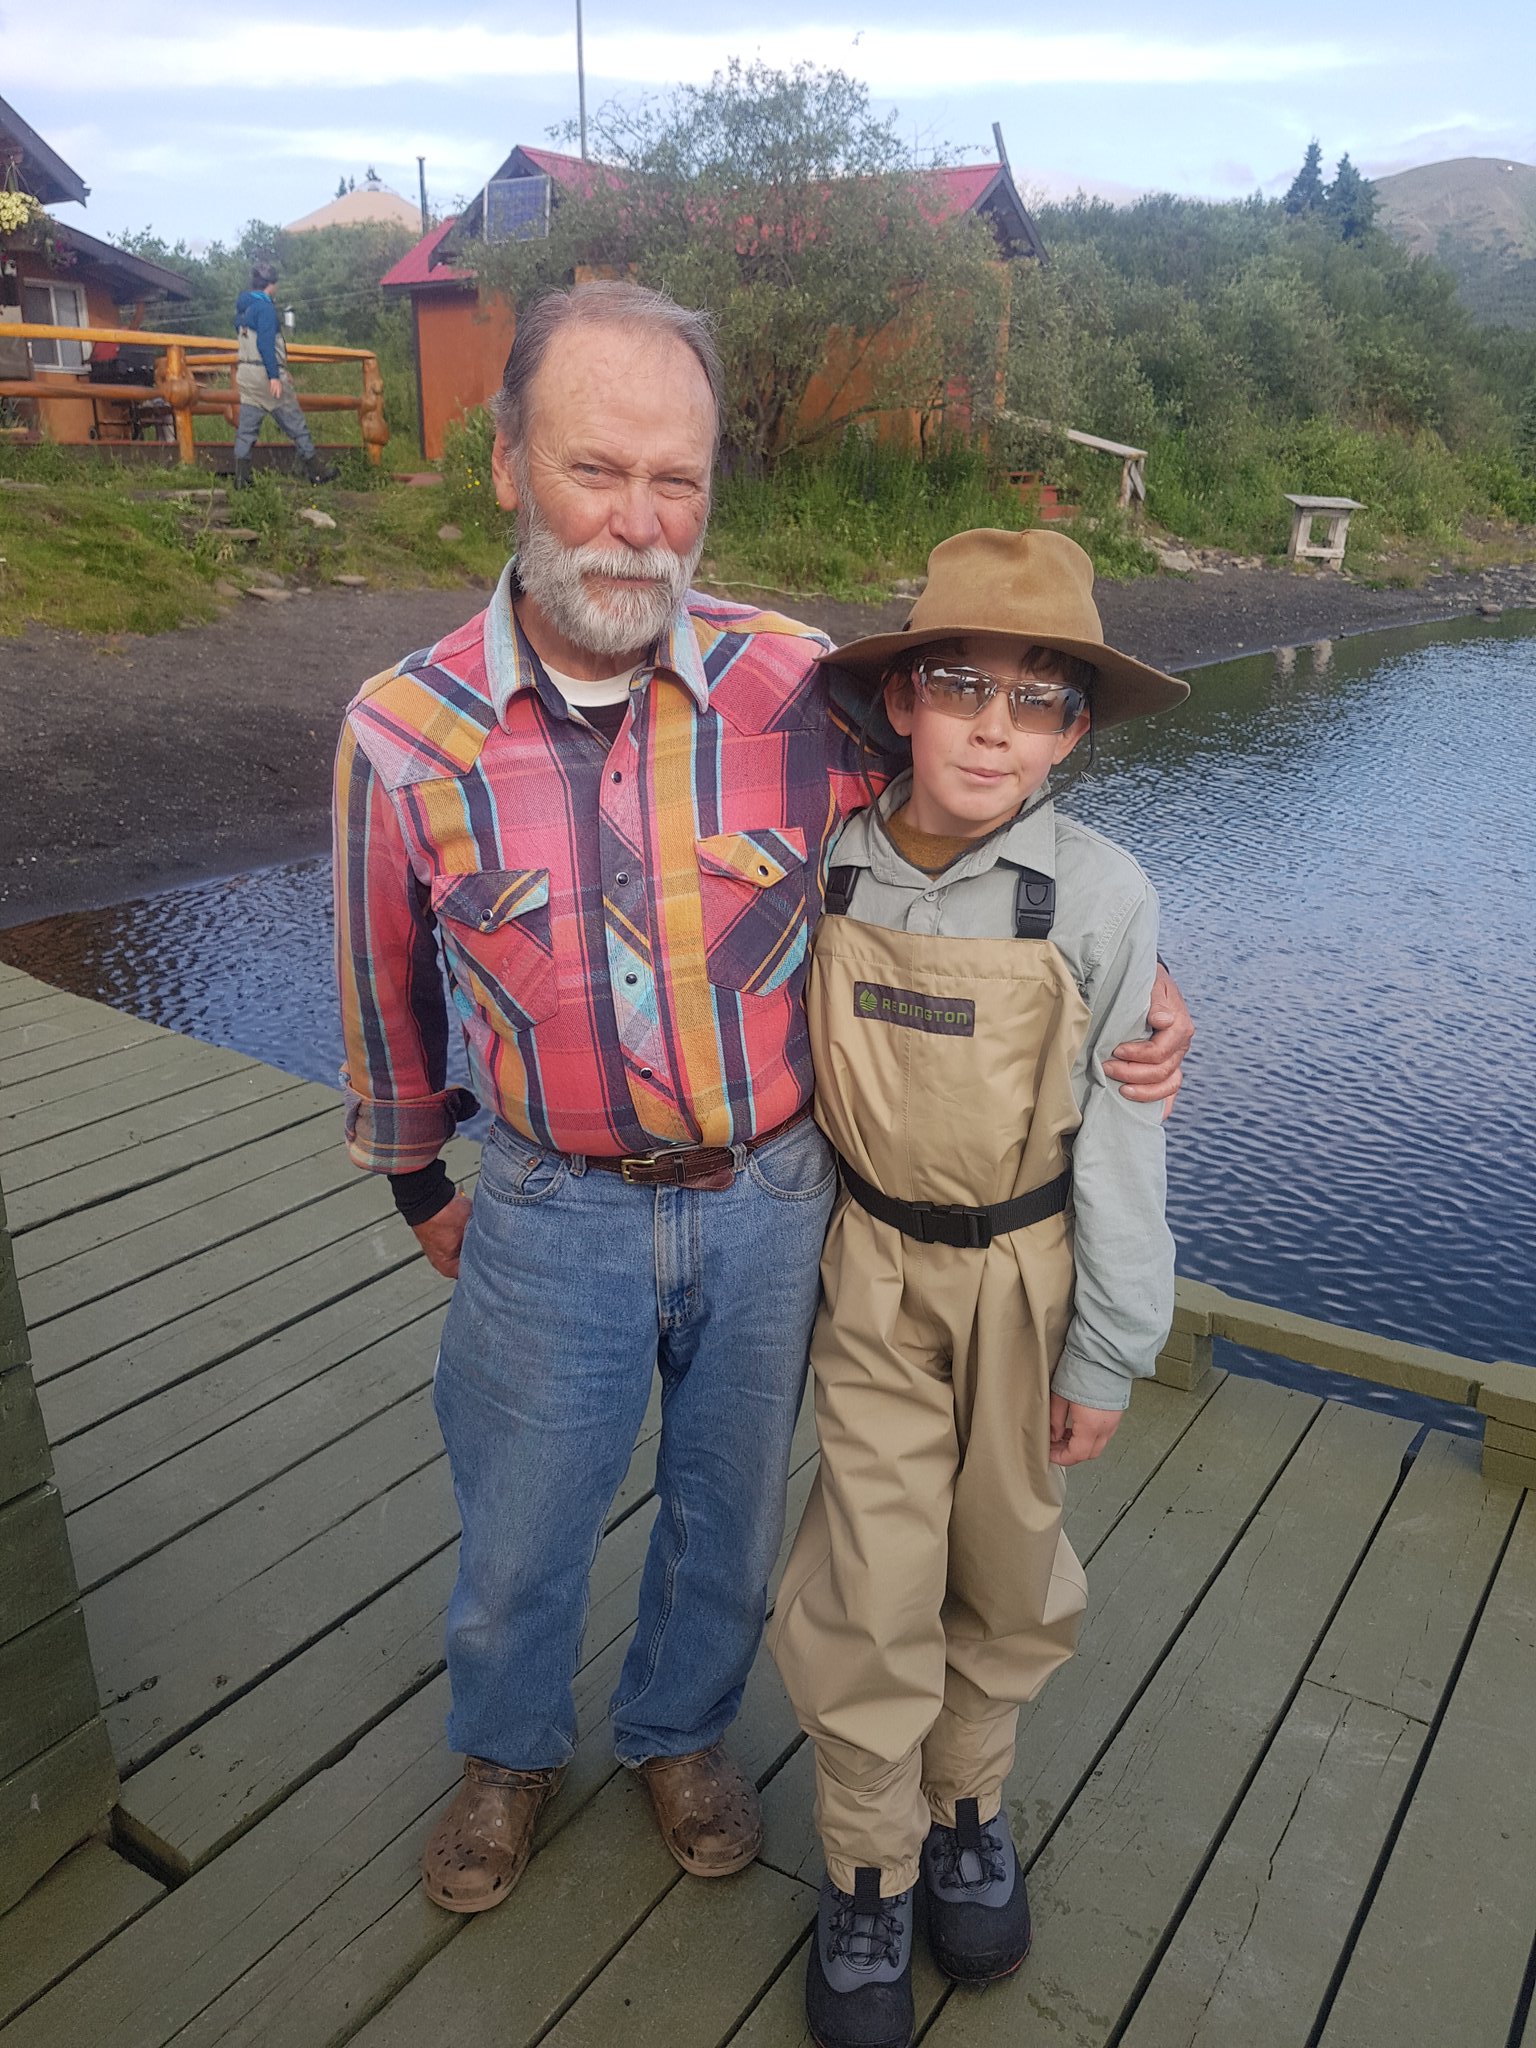 James with our host Ray Collingwood before setting out for the Firesteel River today.